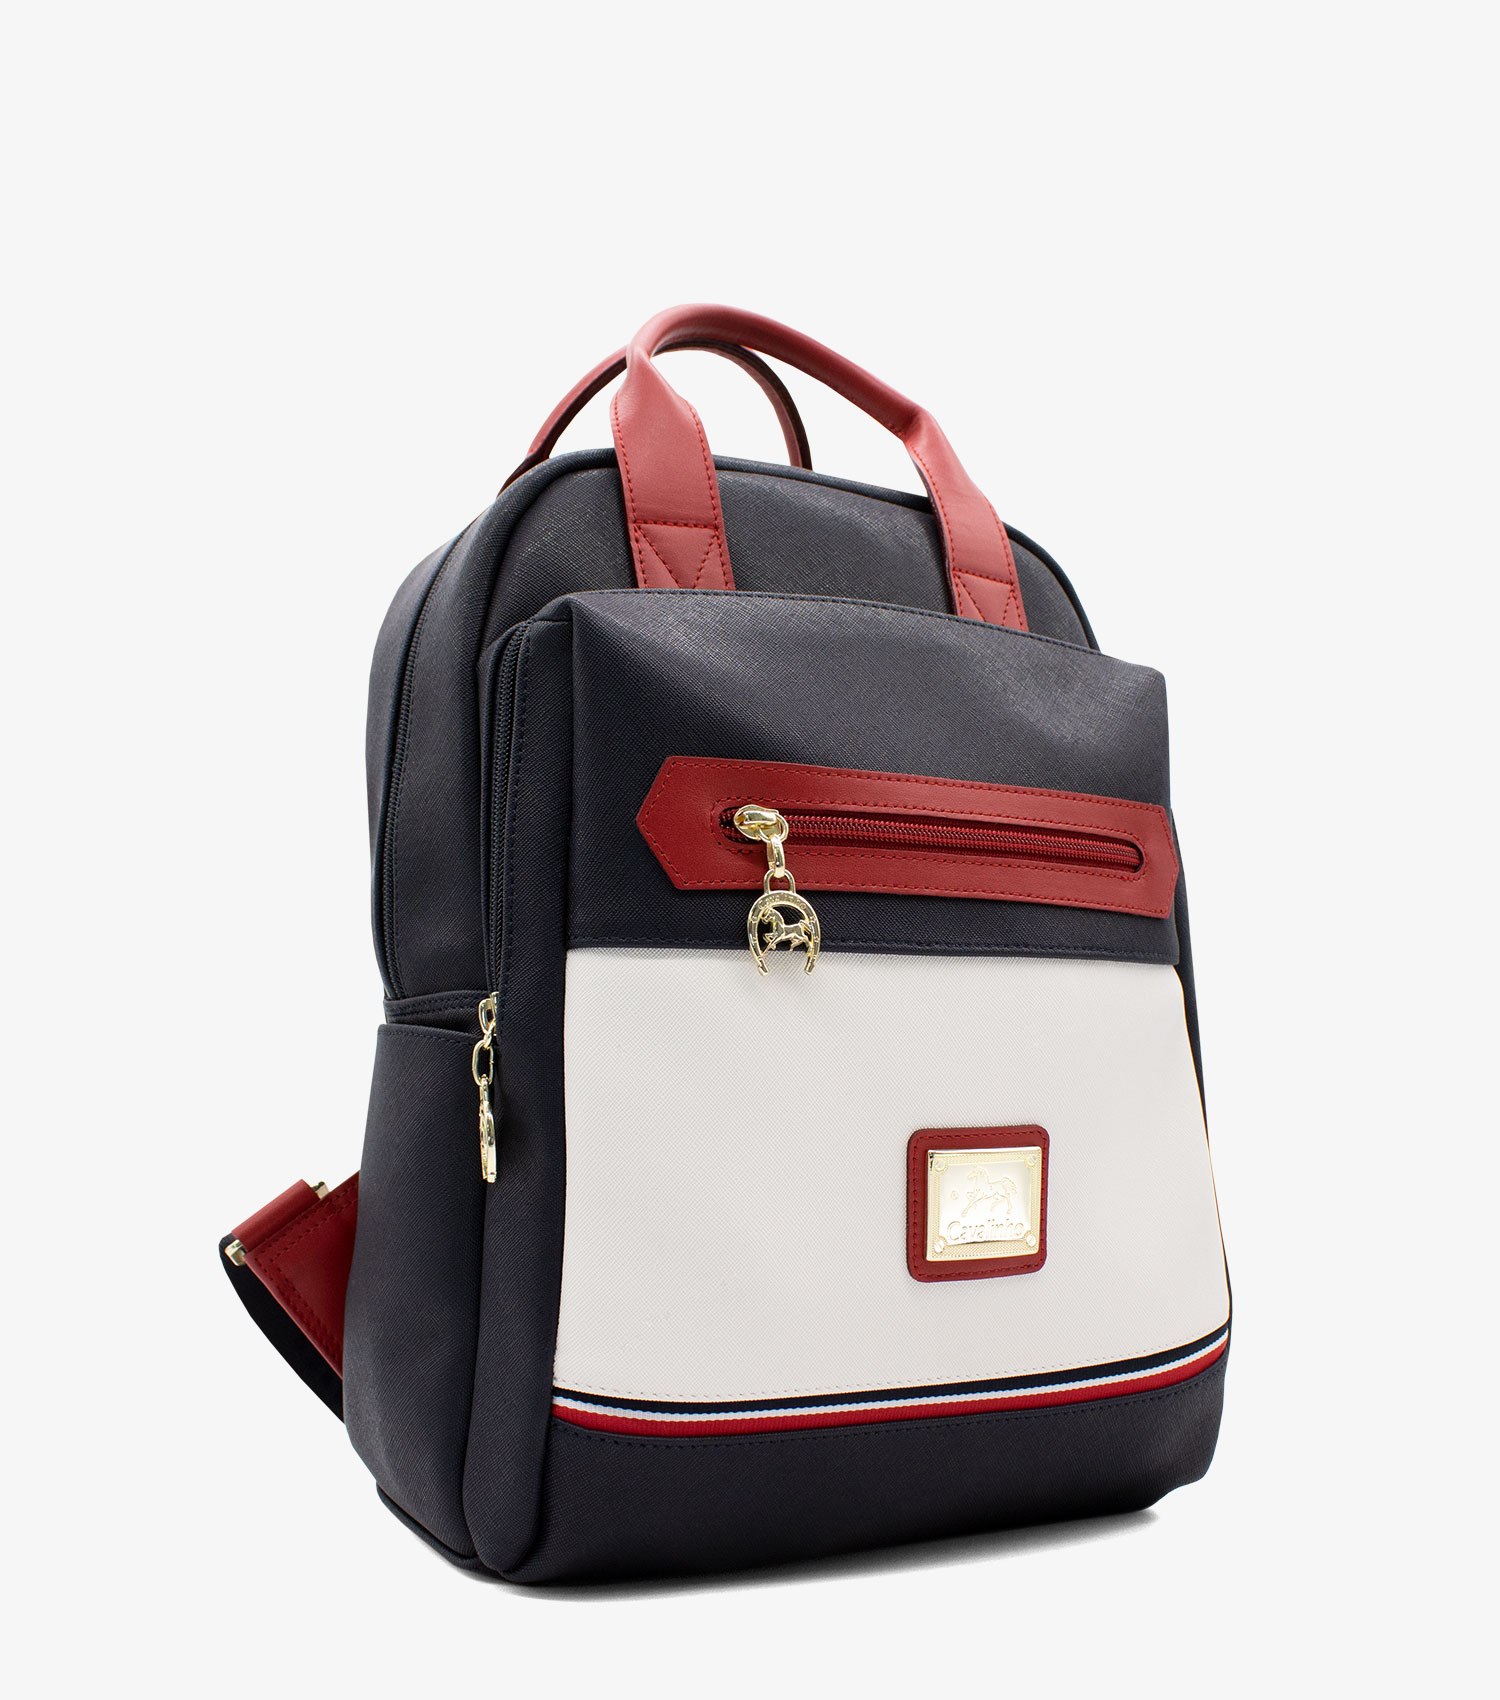 The Sailor Backpack